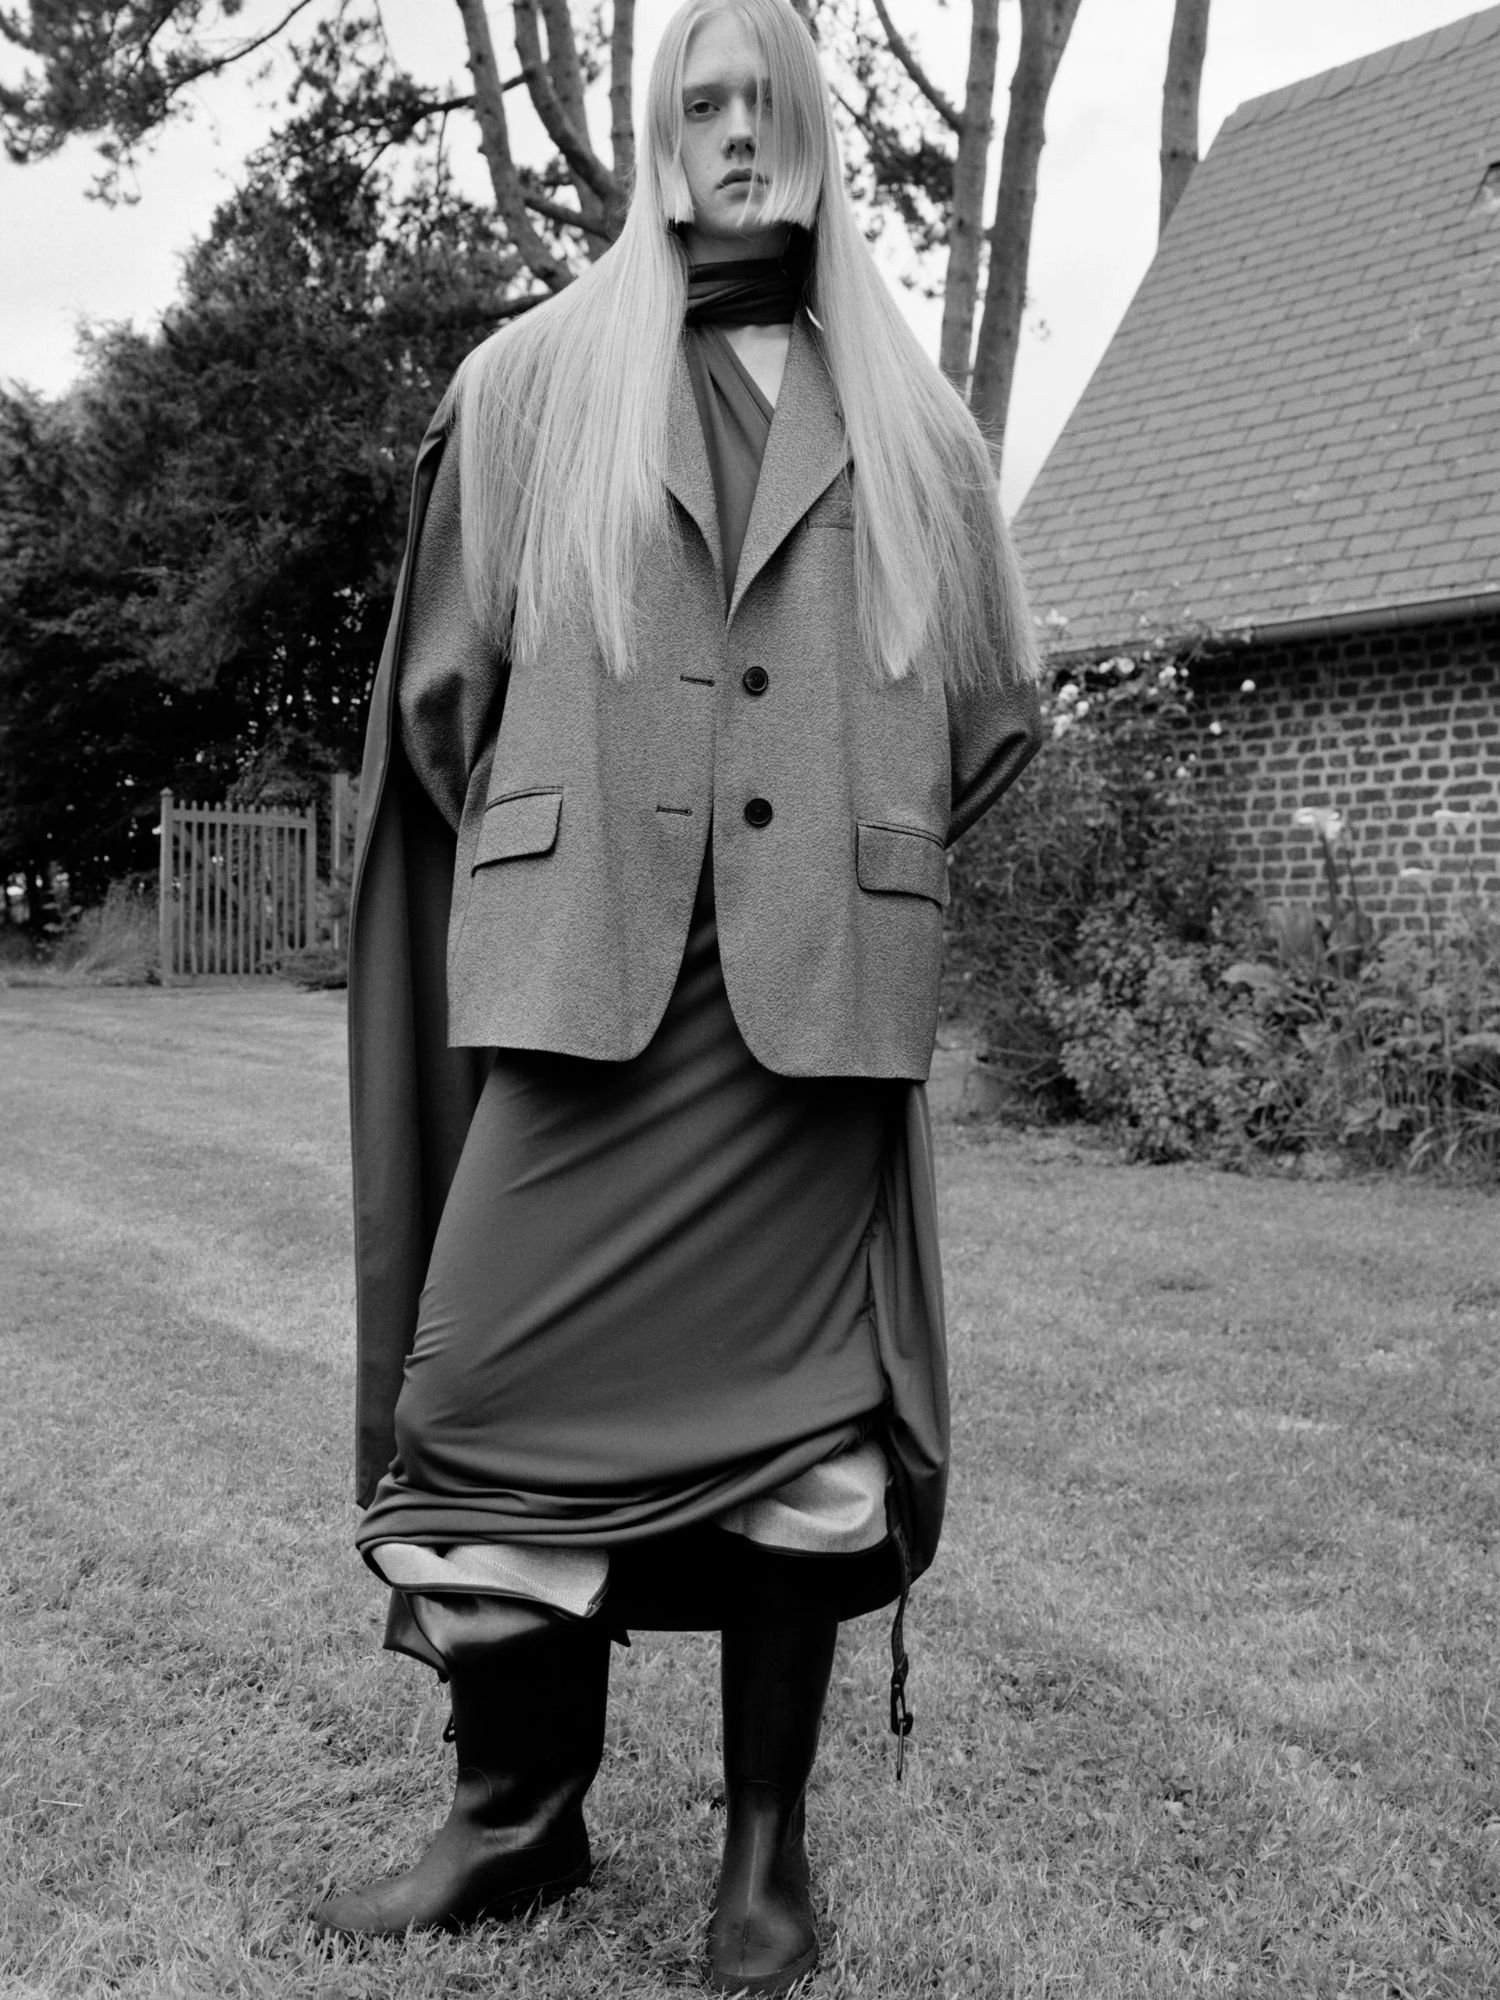 Isa Gustafsson by Tim Elkaim for The Gentlewoman Fall-Winter 2021